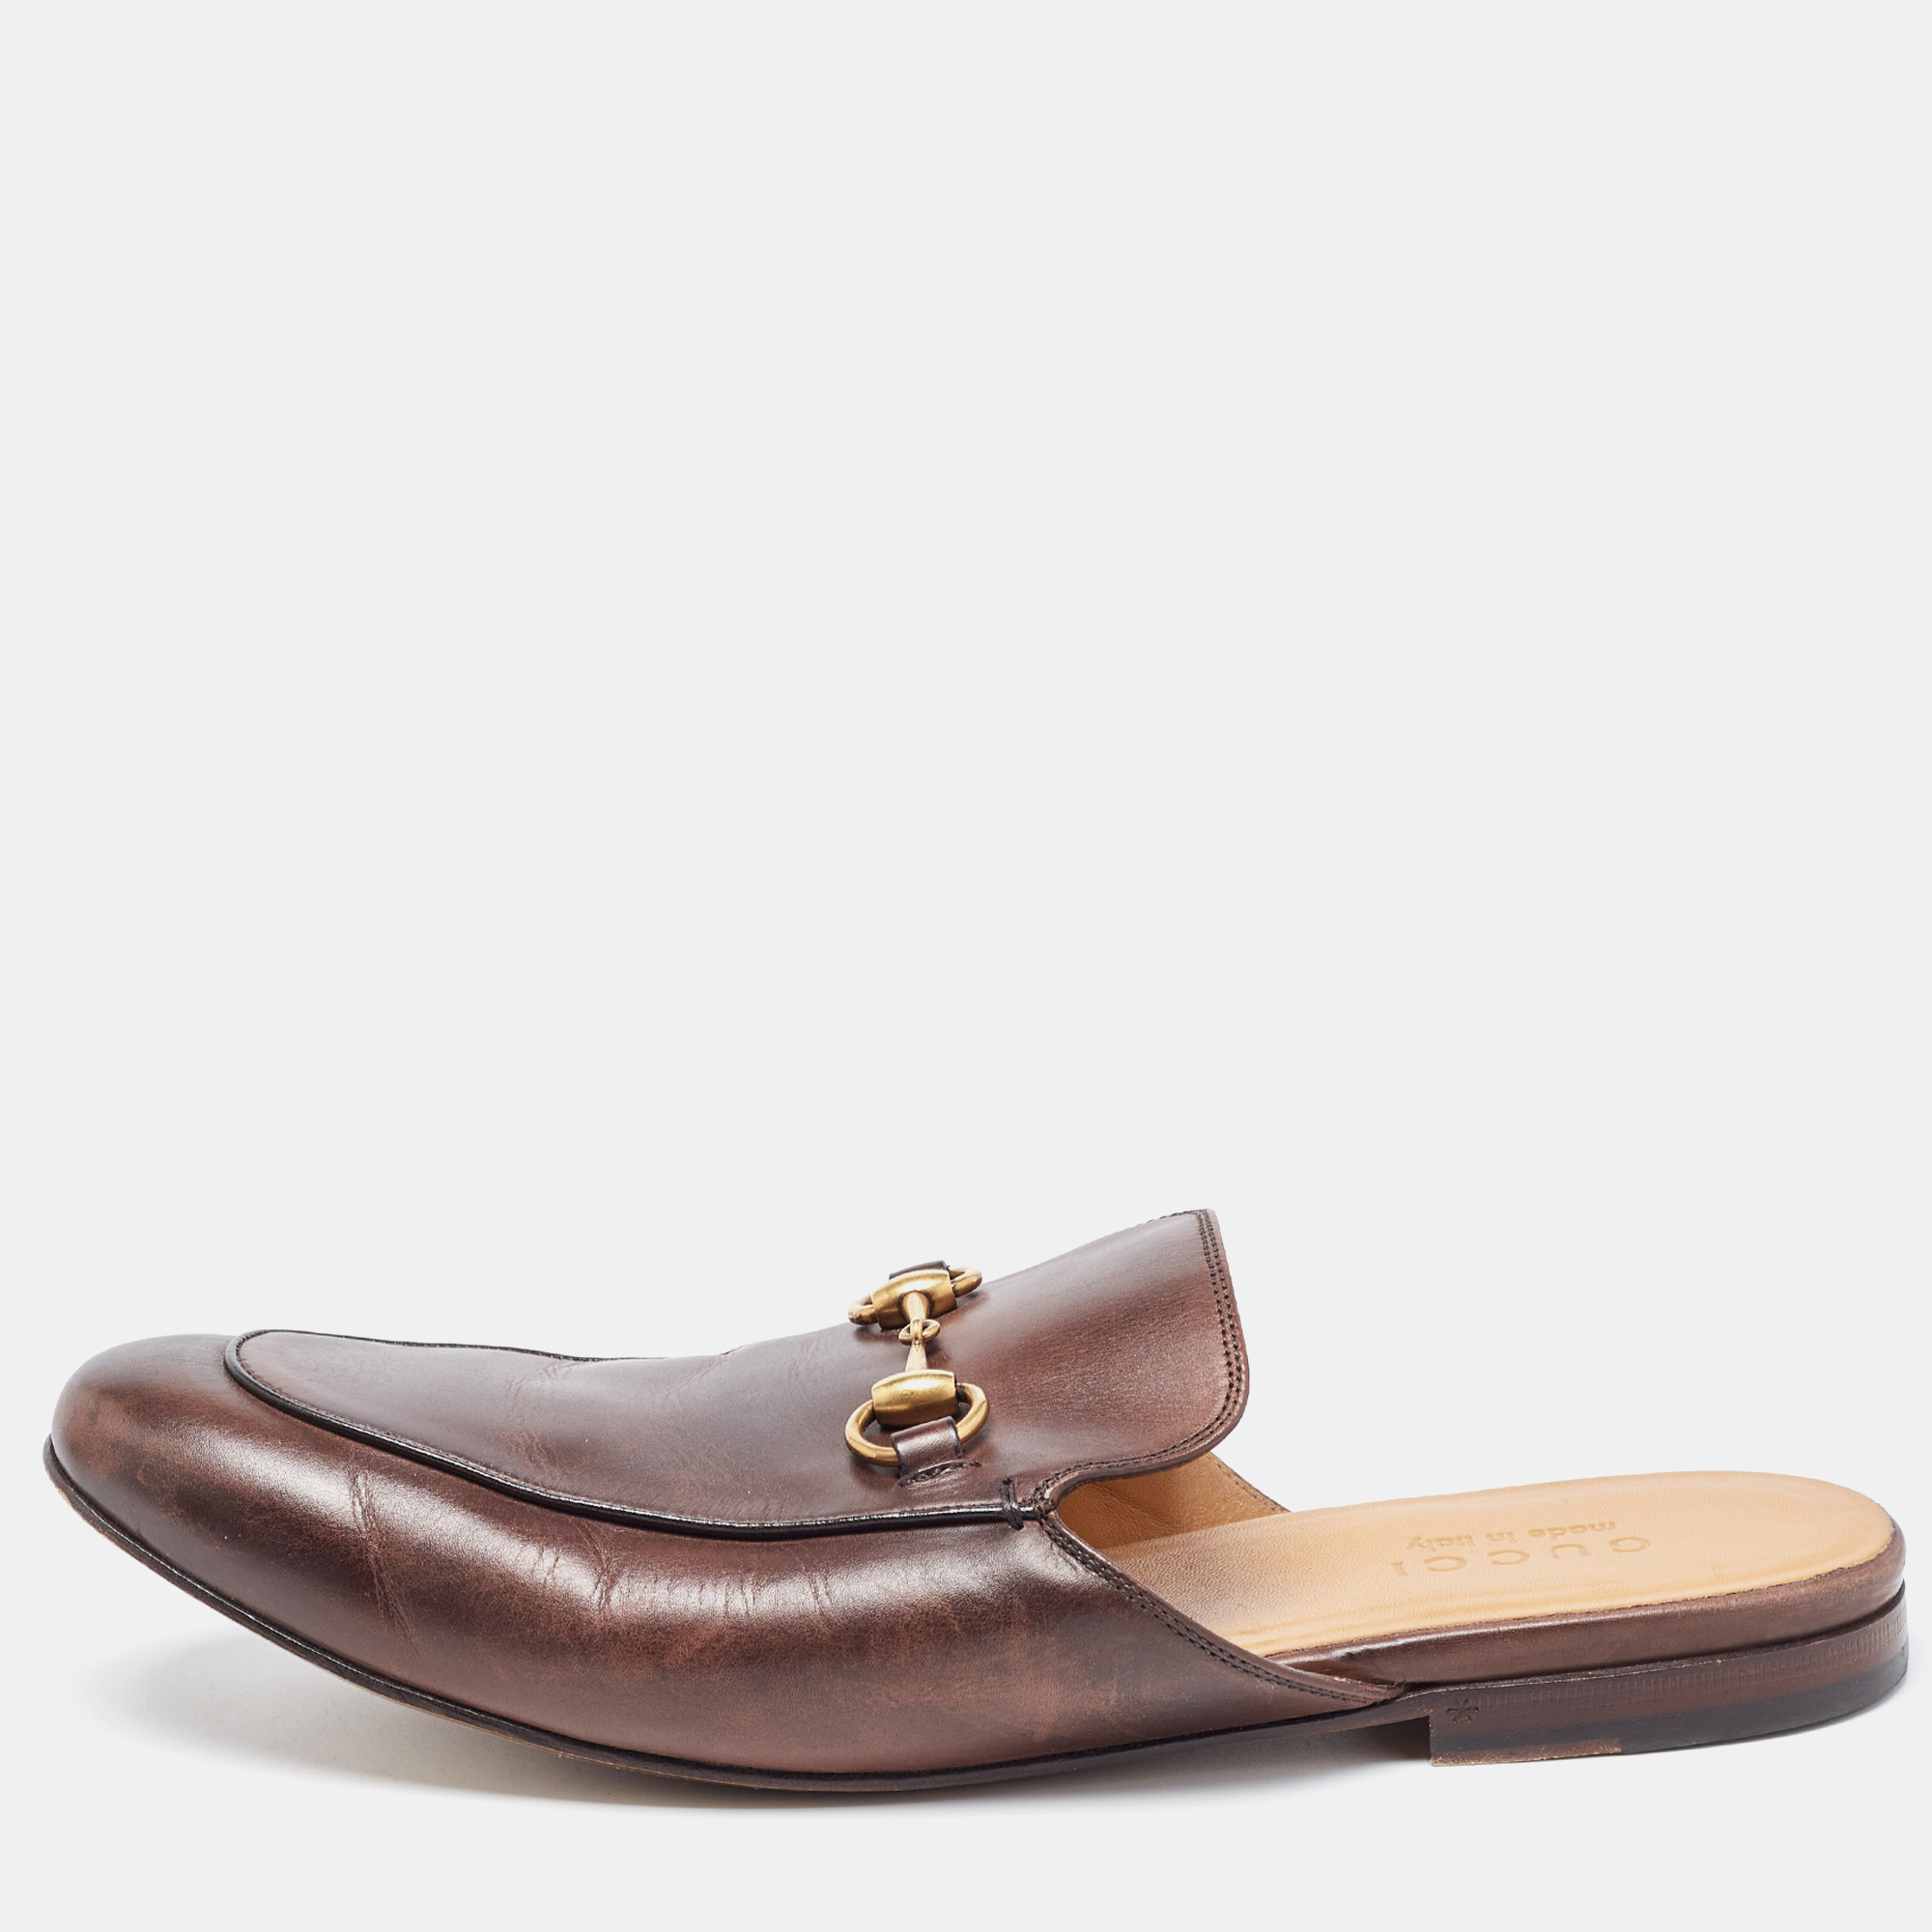 Gucci Brown Leather Horsebit Princetown Flat Mules Size 43